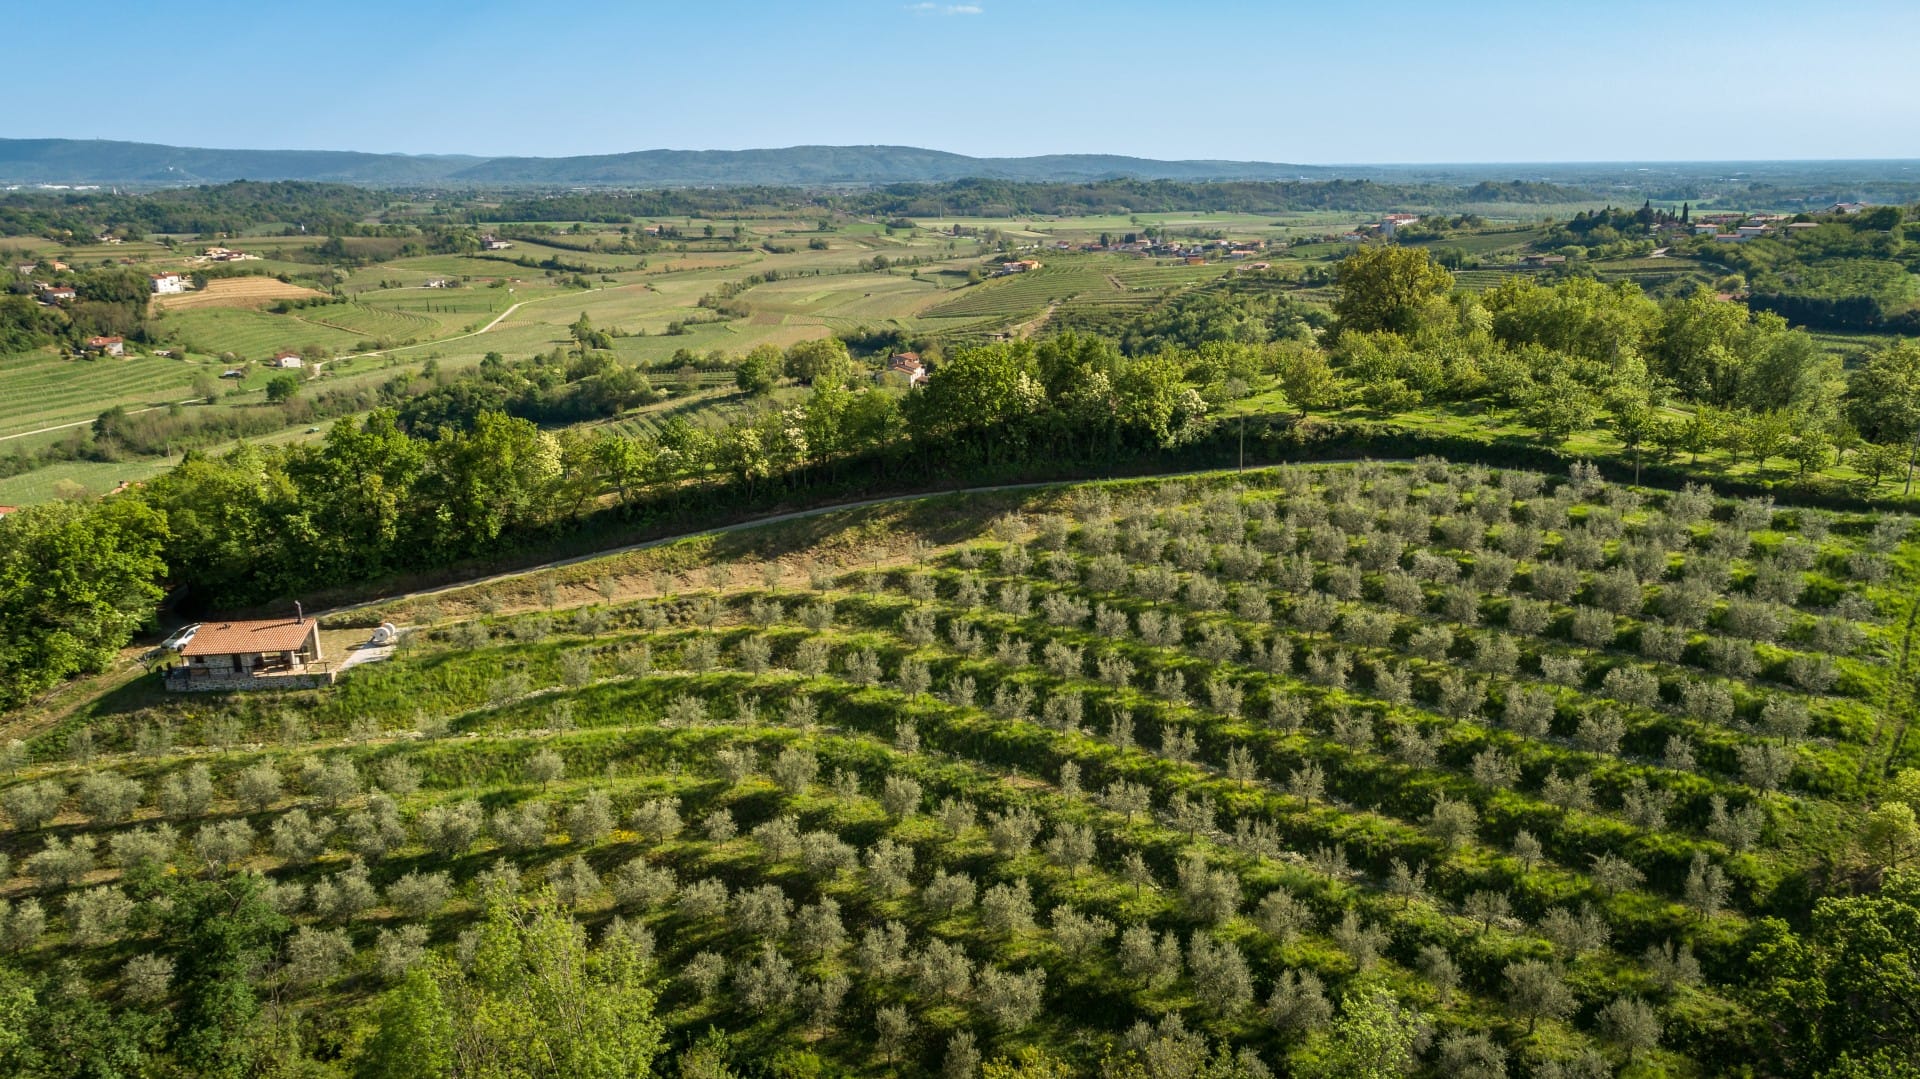 europe-profiles-the-best-olive-oils-production-awardwinning-evoo-the-latest-chapter-in-storied-slovenian-family-legacy-olive-oil-times